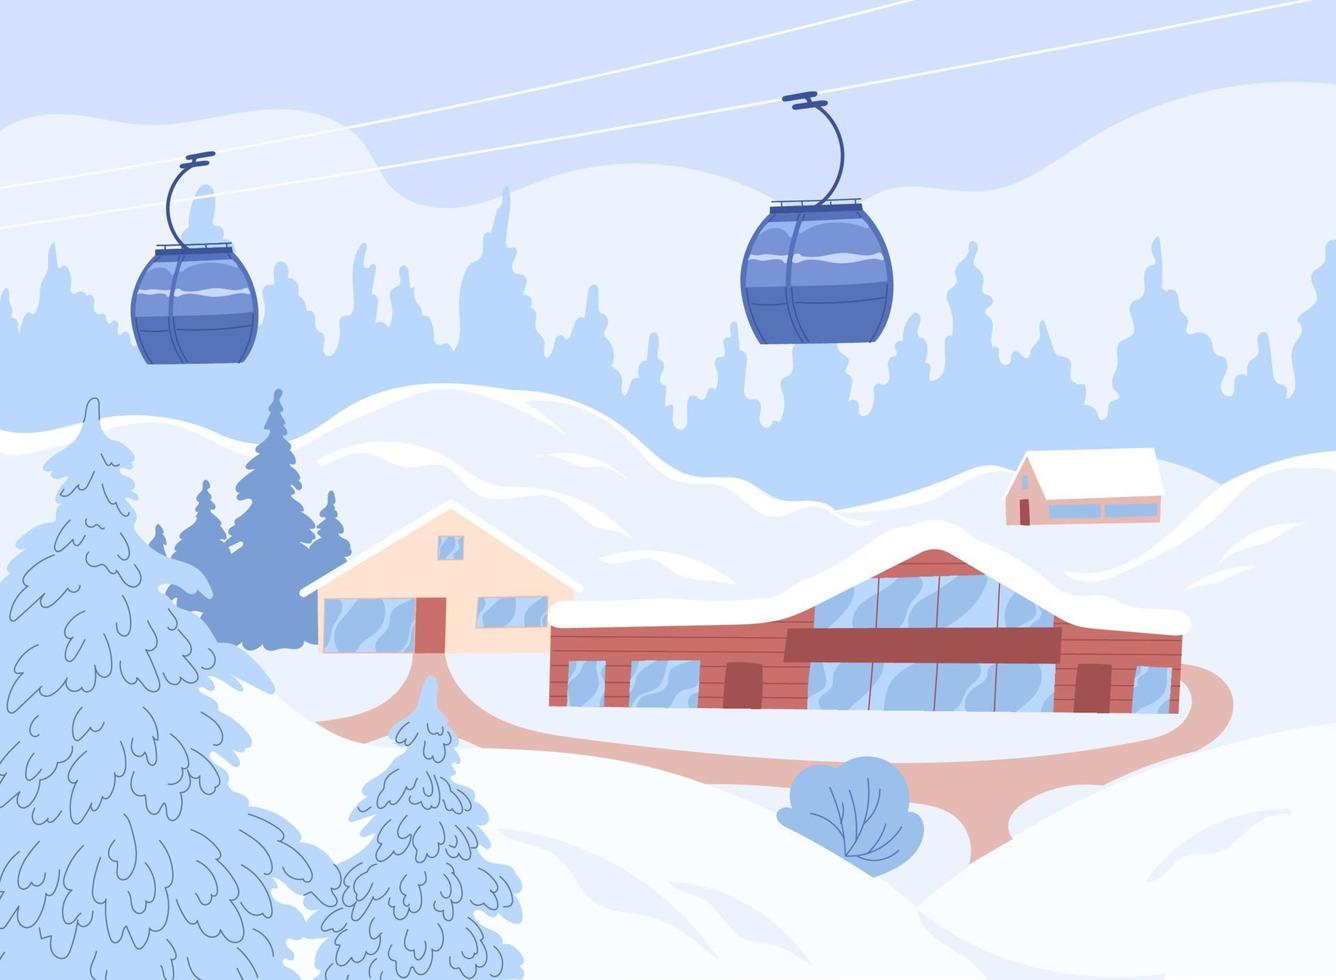 Ski resort. Winter mountain scenery with a cable car vector